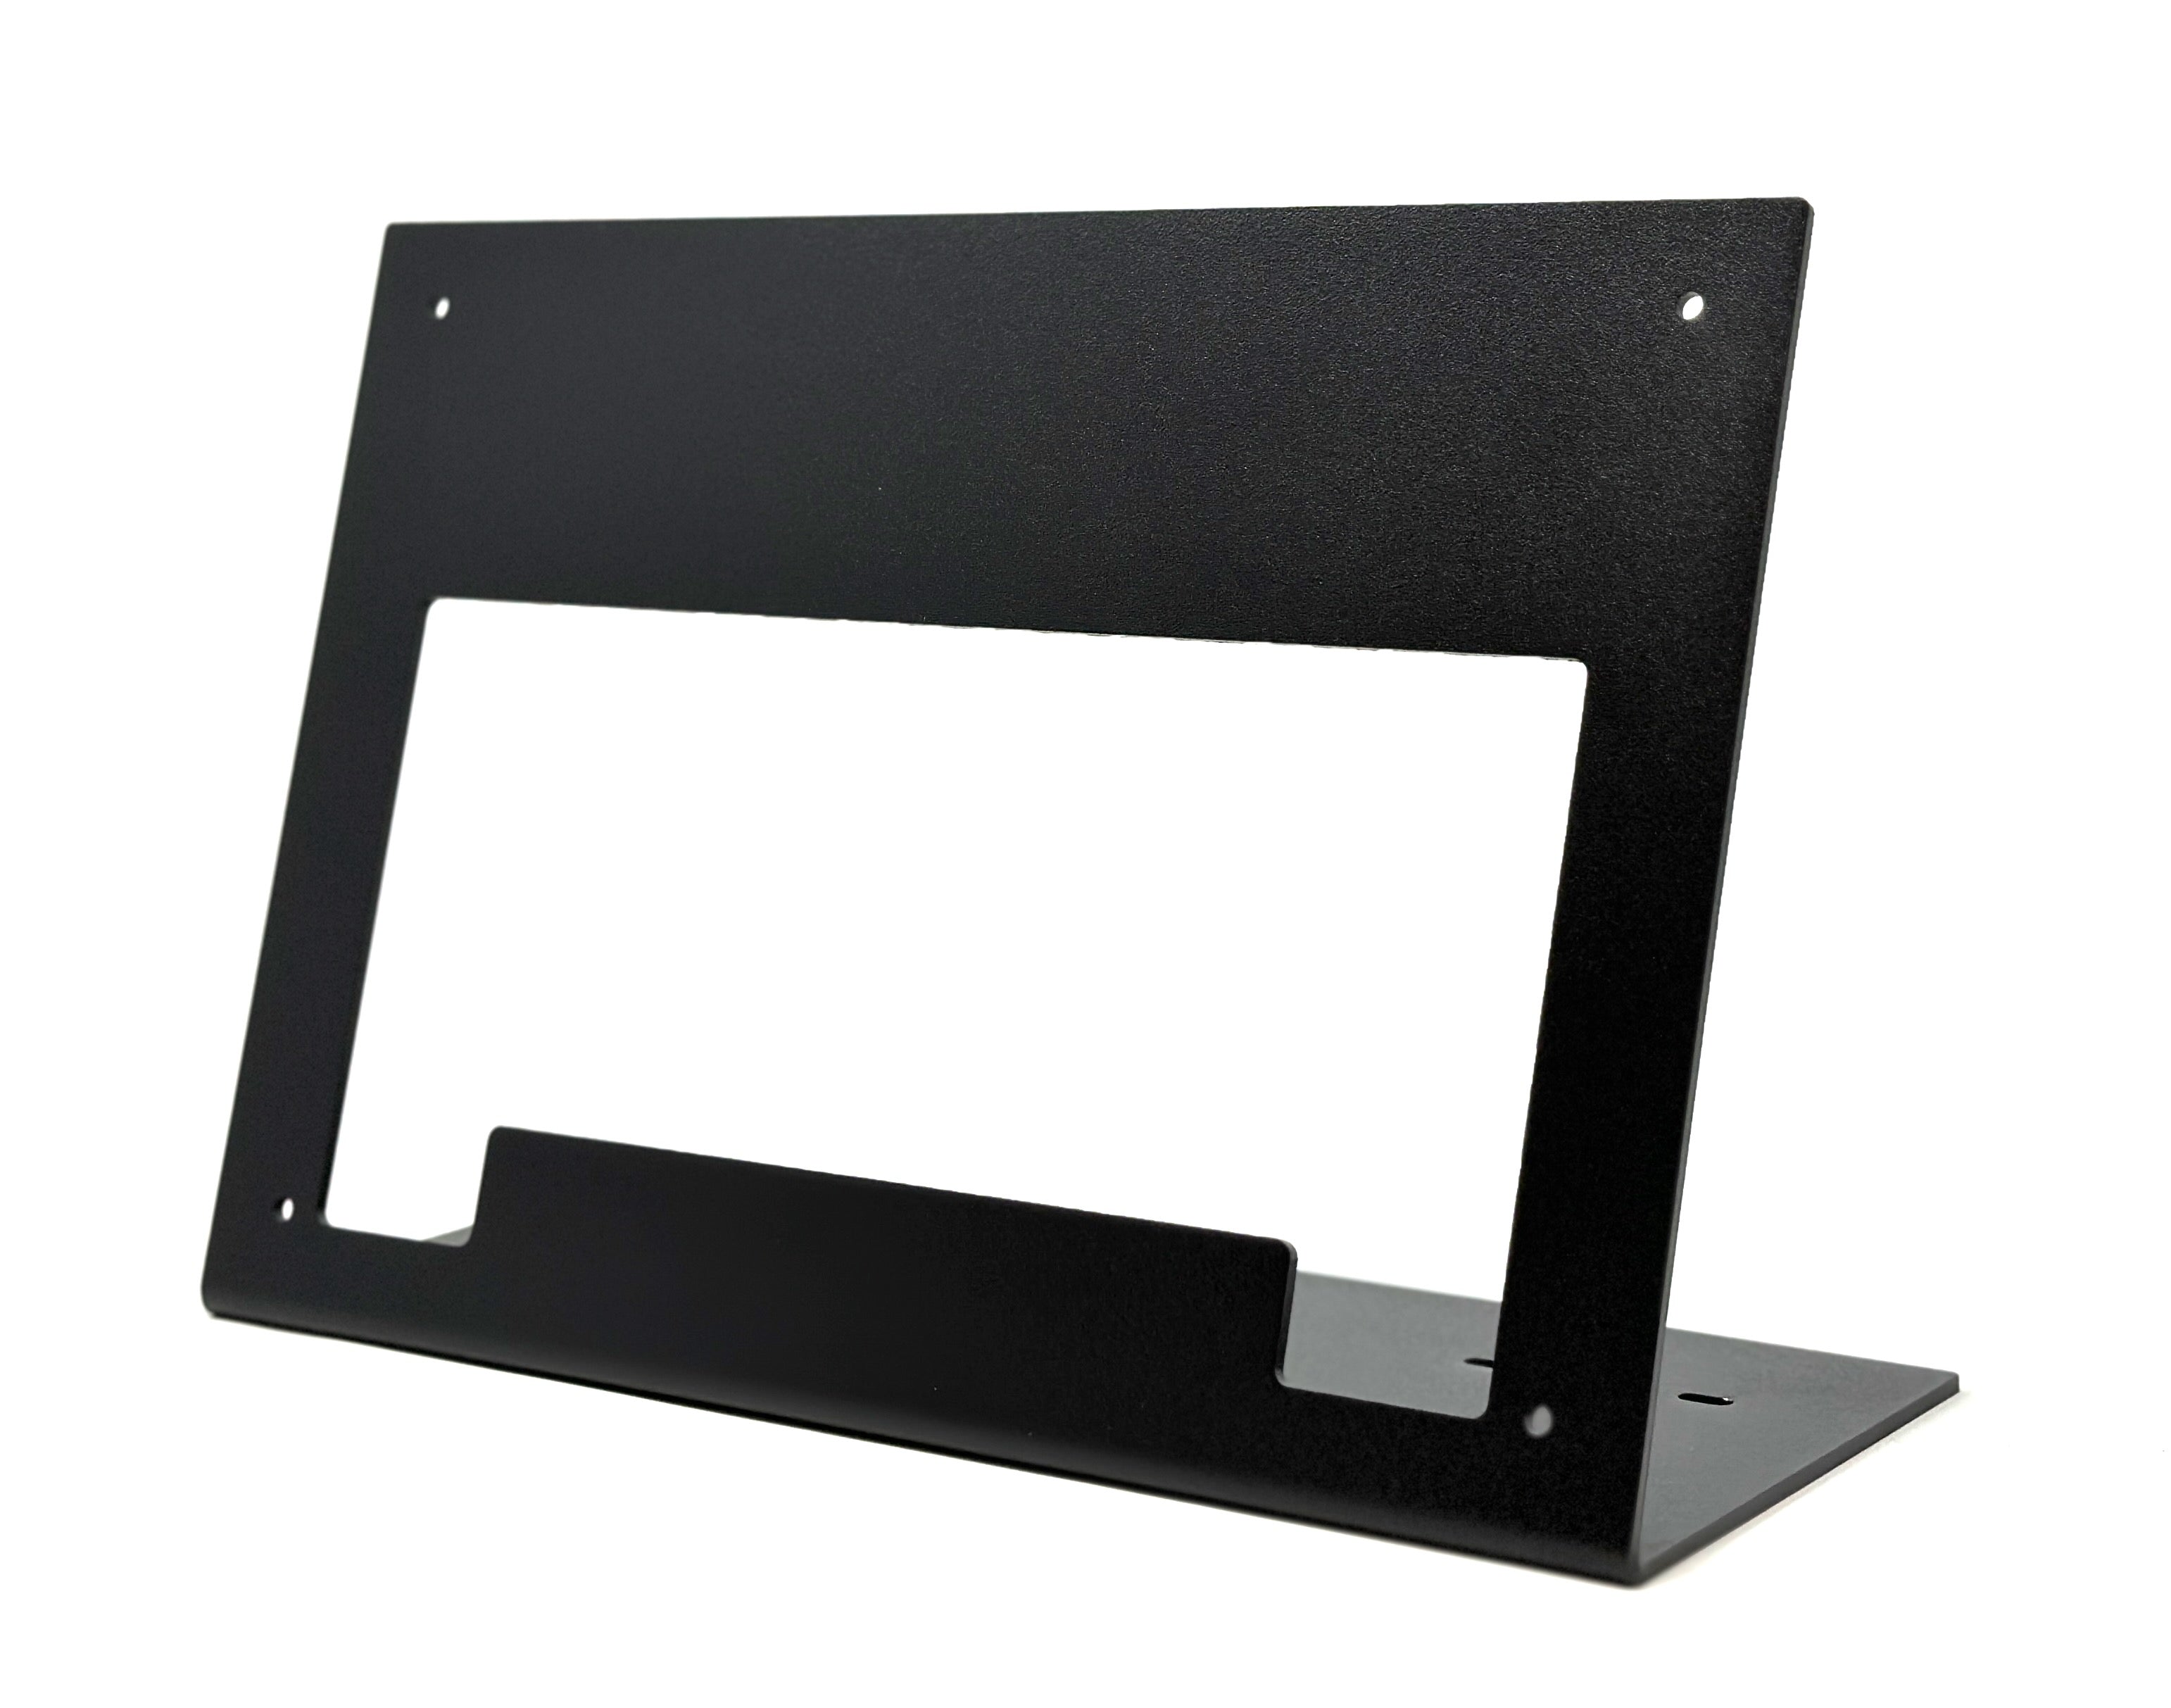 Desktop stand for RealSimGear G500 or G3X